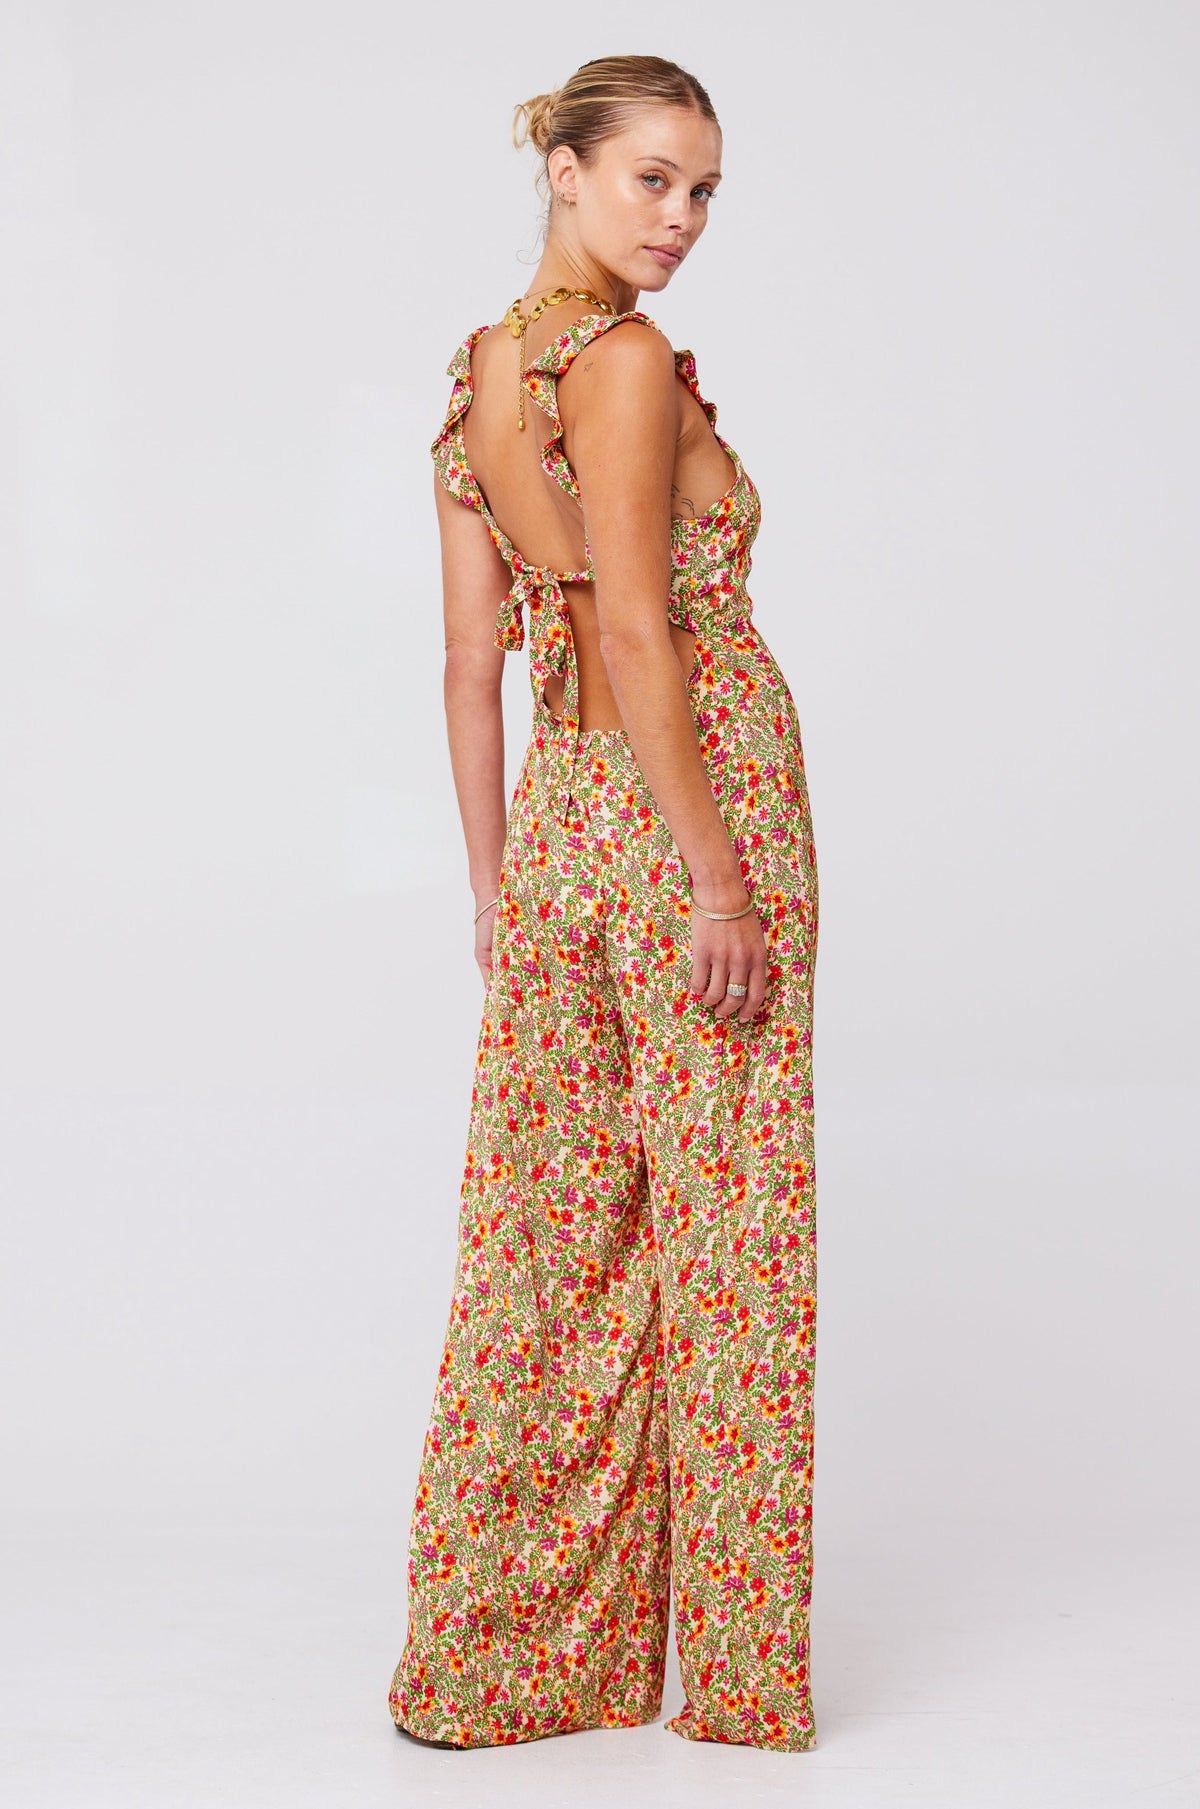 This is an image of Jilly Jumpsuit in Fleetwood - RESA featuring a model wearing the dress